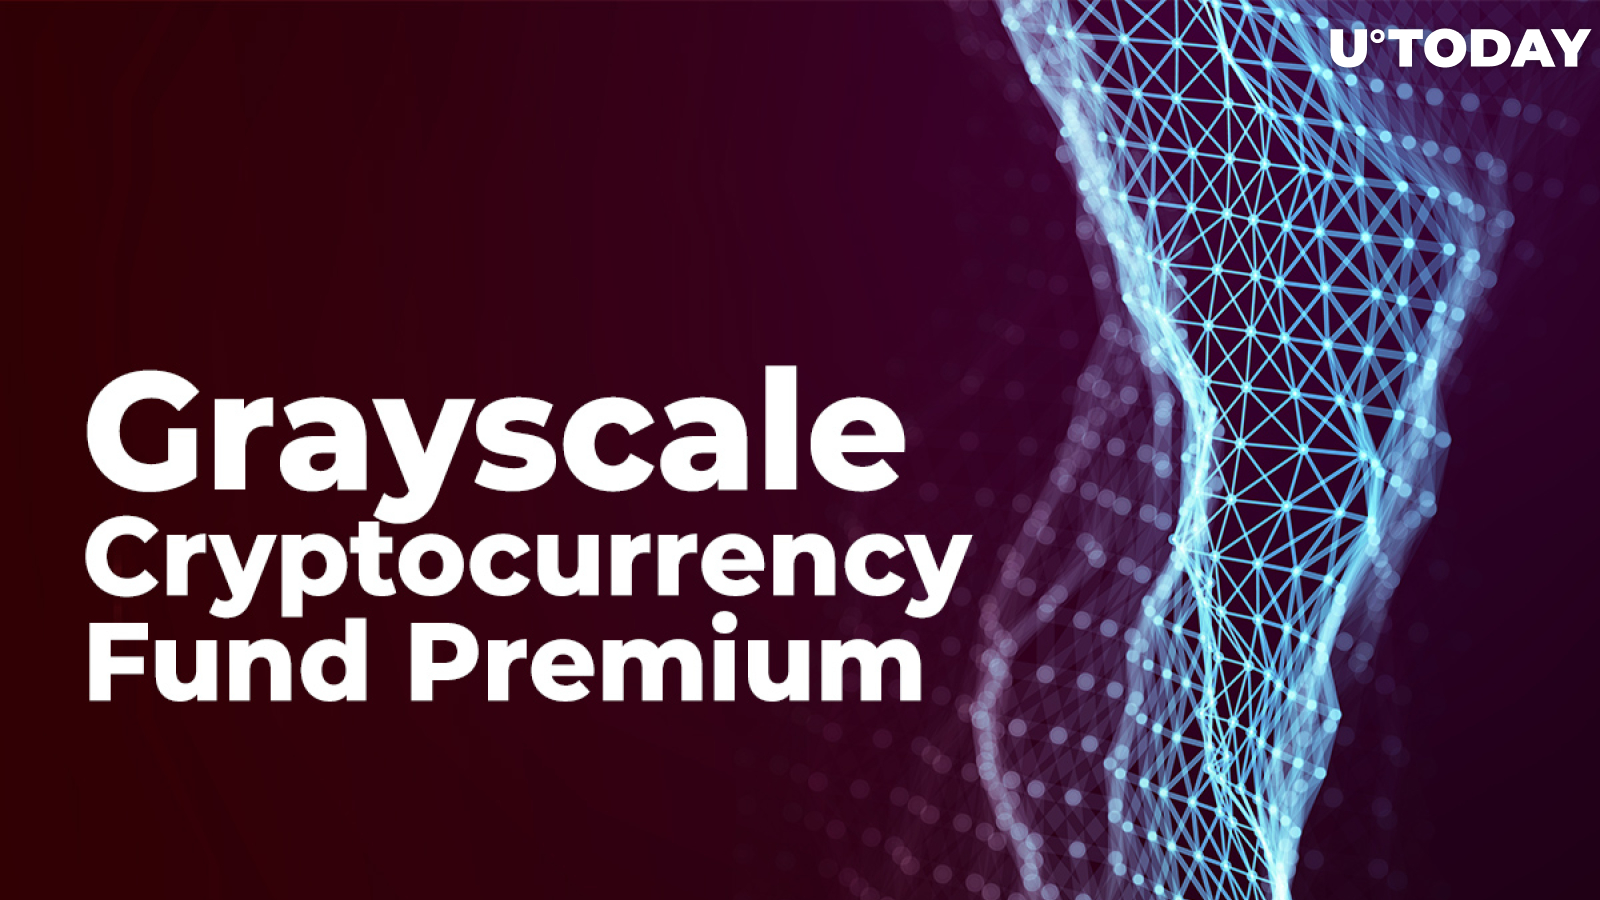 Grayscale Cryptocurrency Fund Premium Hits Negative